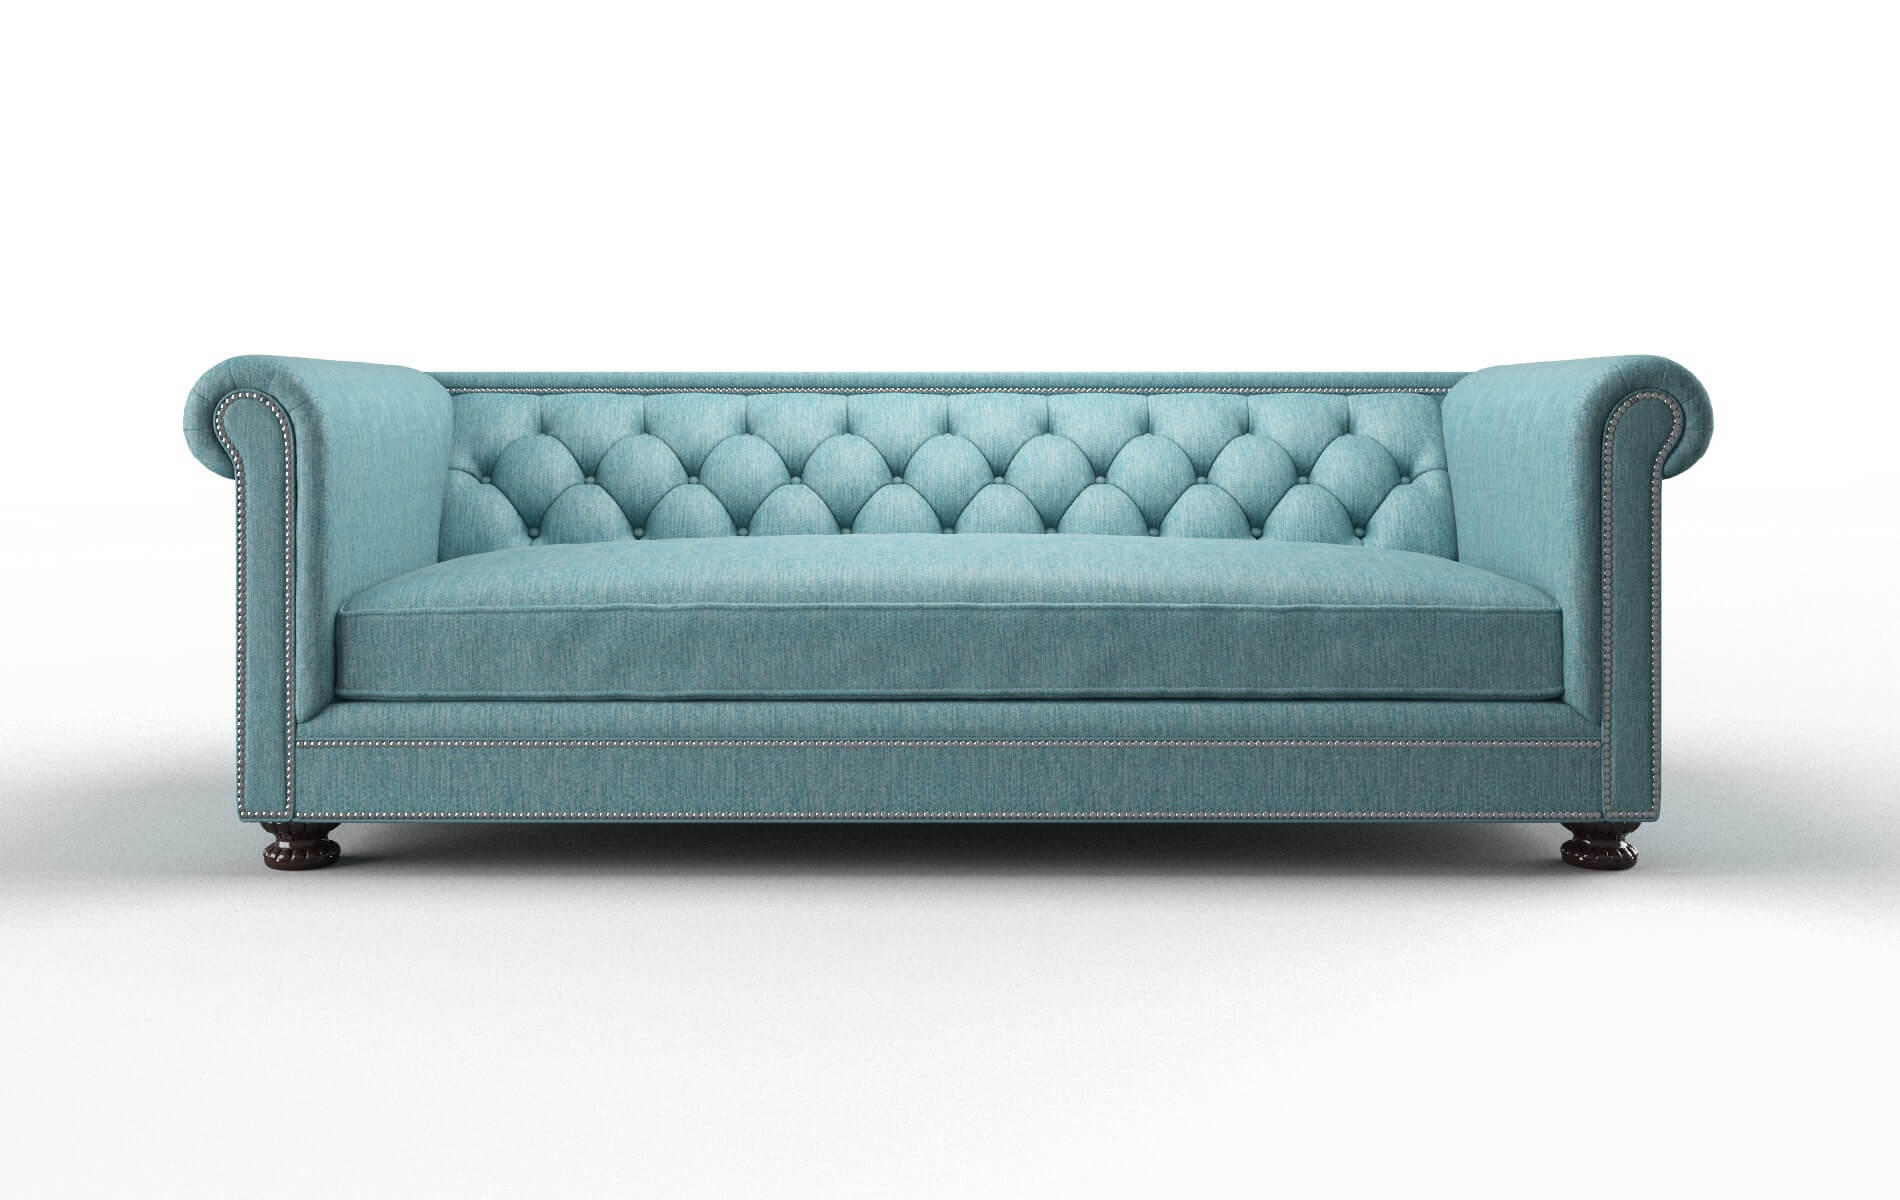 Athens Cosmo Turquoise chair espresso legs